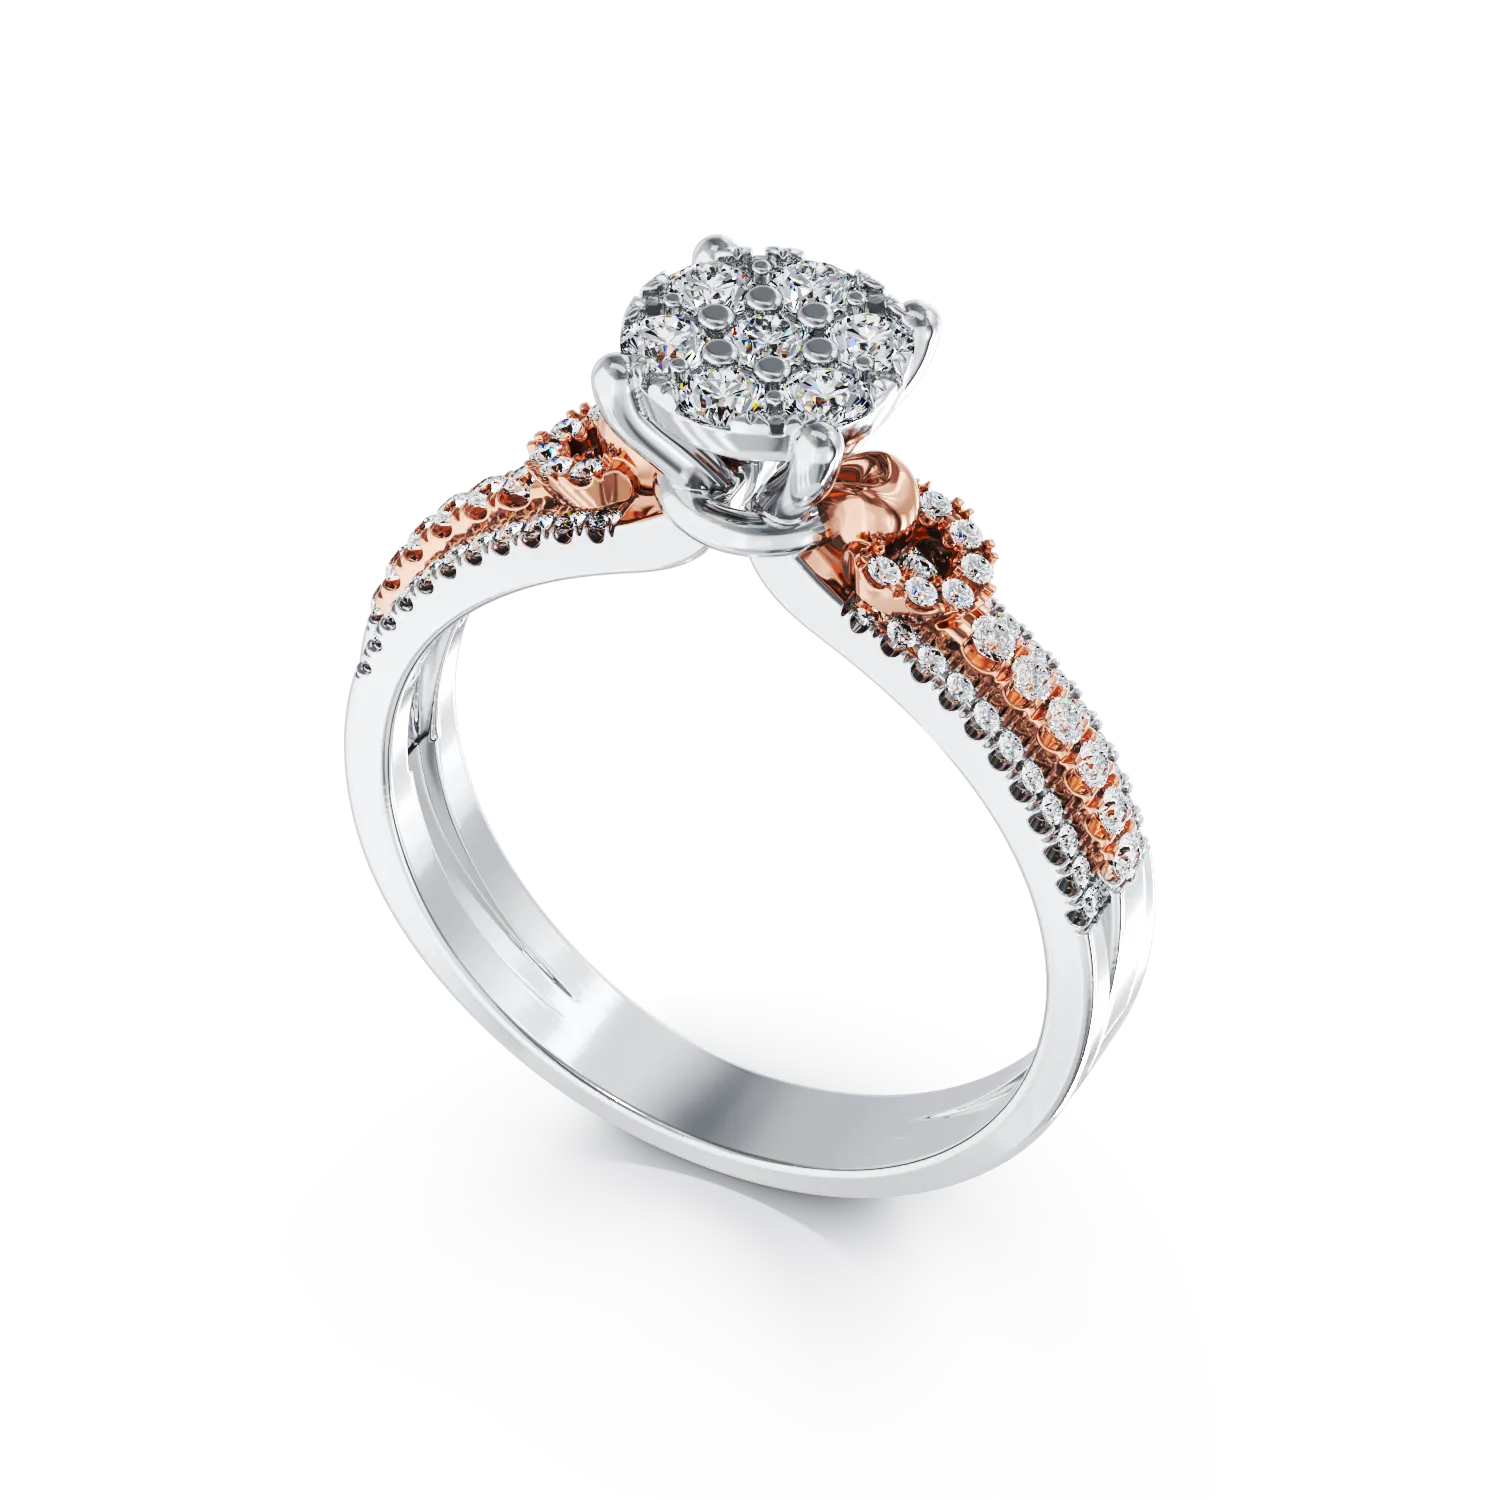 18K white-rose gold engagement ring with 0.47ct diamonds